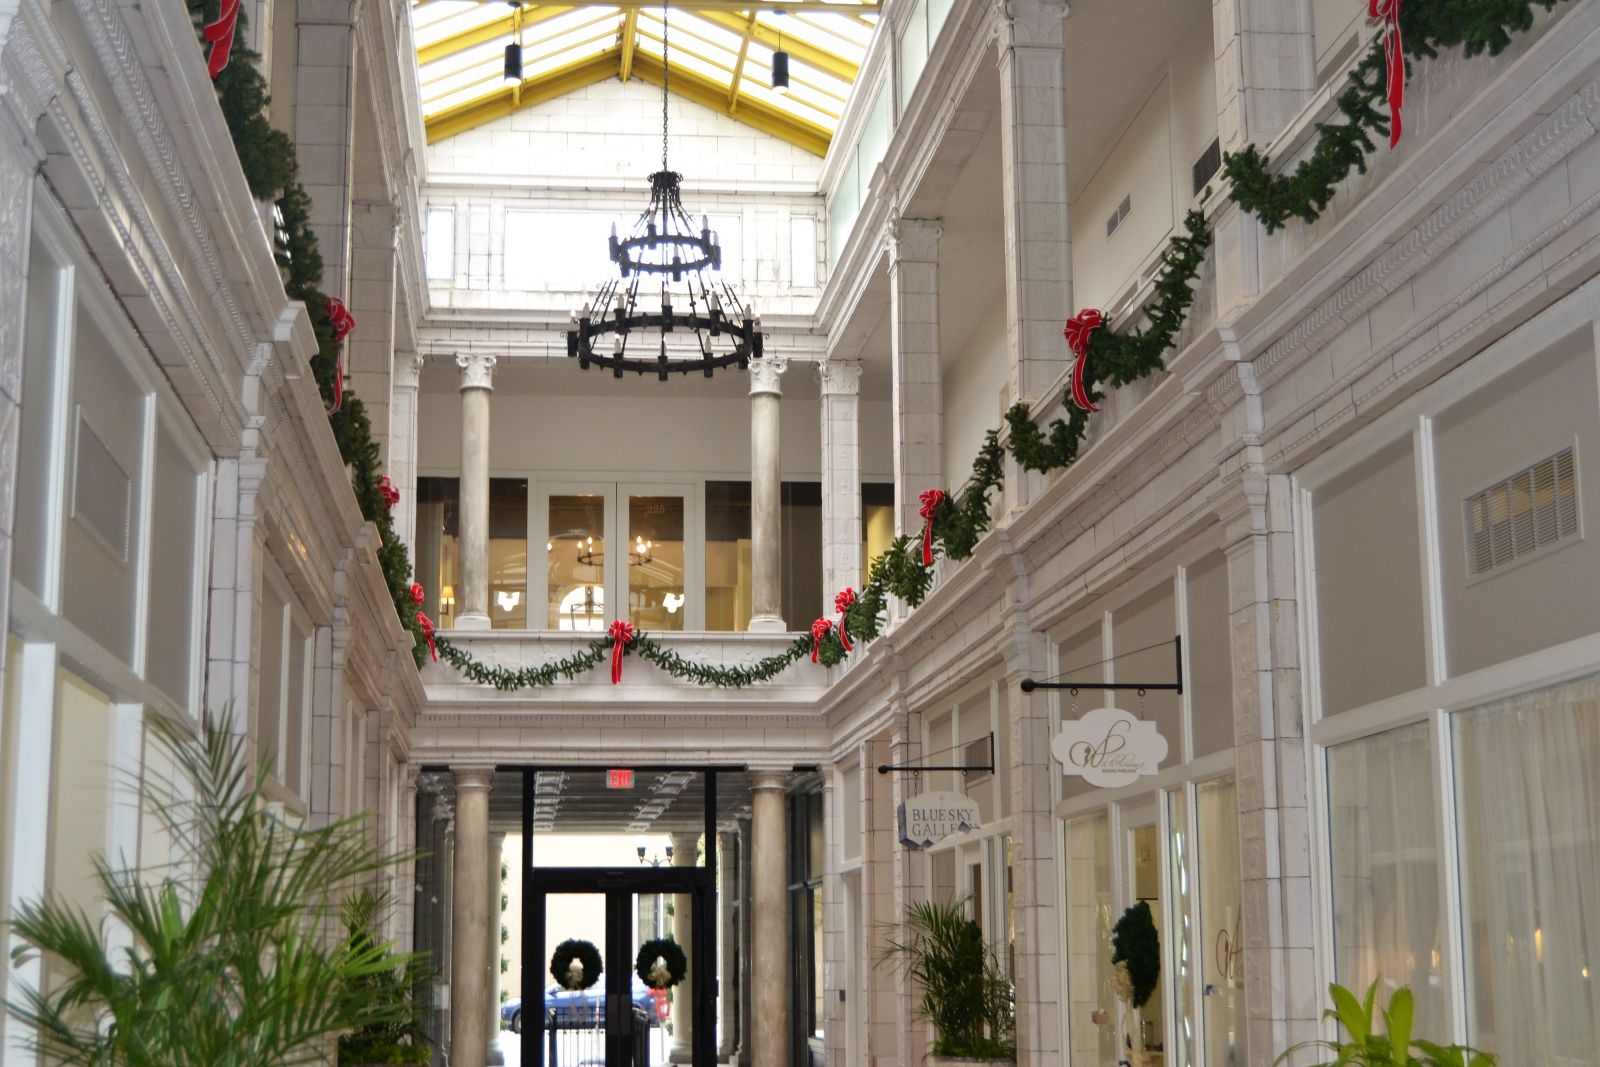 The Arcade Mall, decked out for the holidays, will hold a grand reopening to celebrate years of renovations today at 3 p.m. (Photo/Melinda Waldrop)